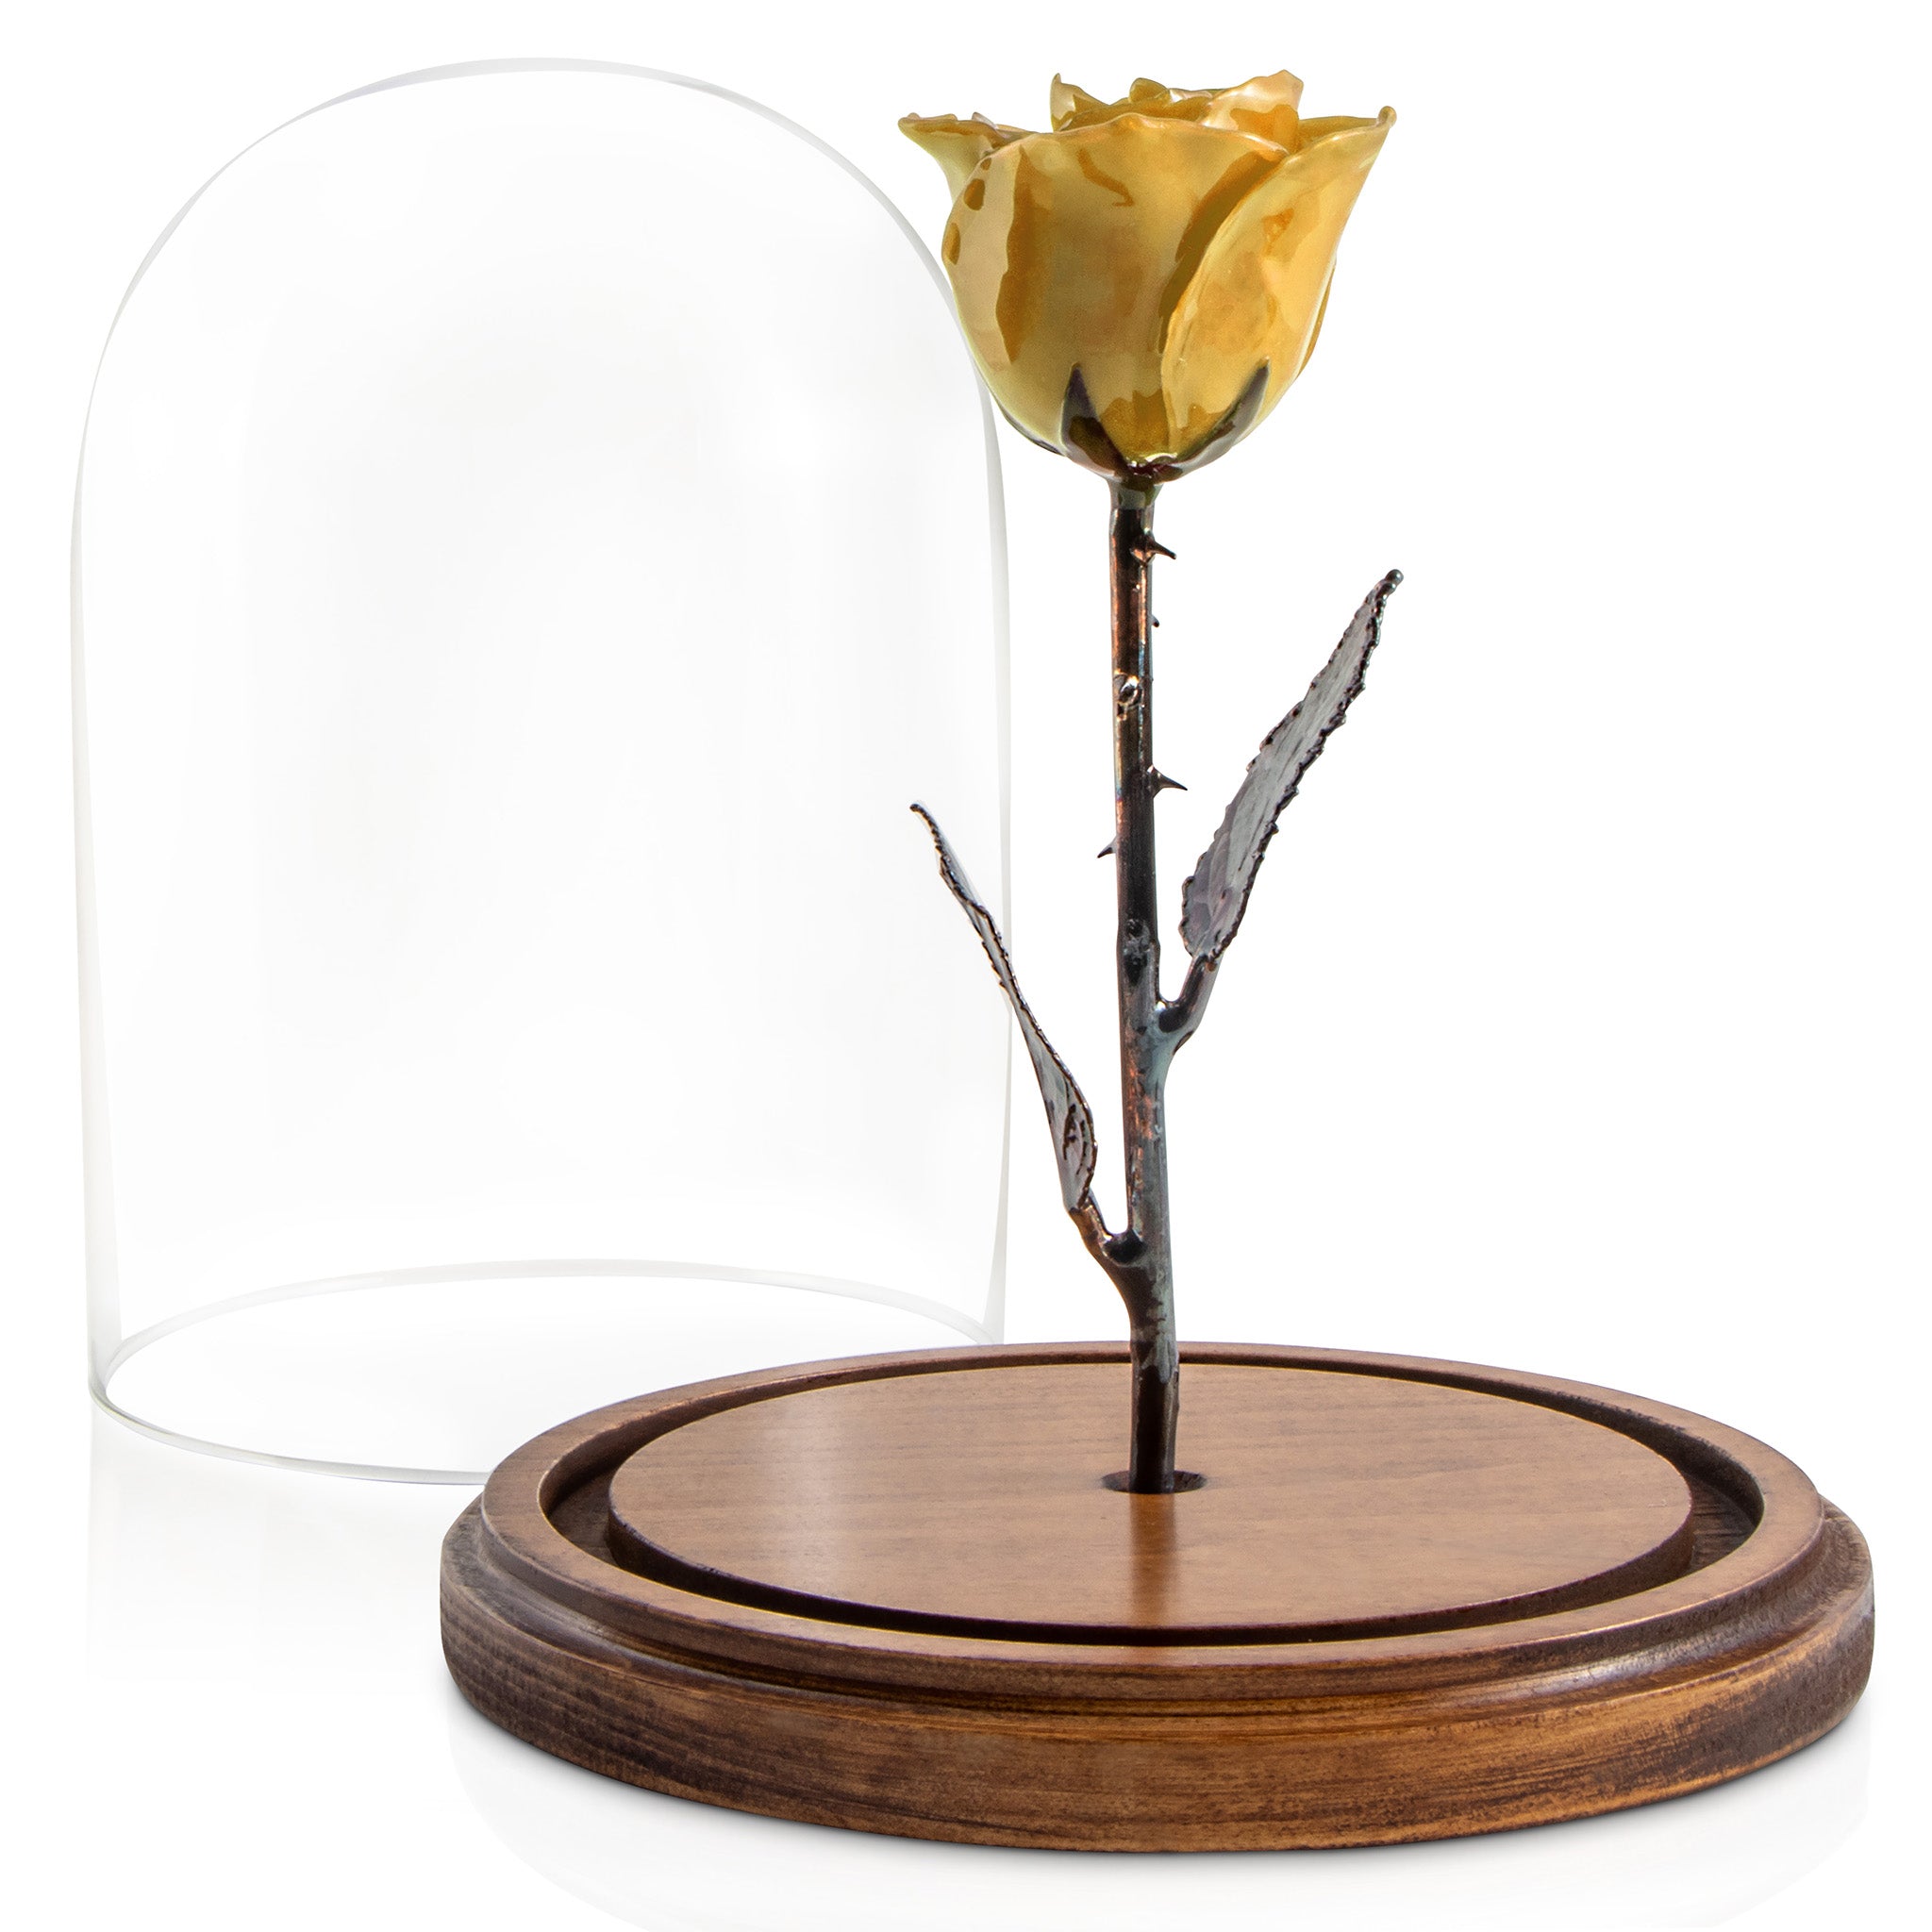 Yellow Enchanted Rose (aka Beauty & The Beast Rose) with Patina Copper Stem Mounted to A Hand Turned Solid Wood Base under a glass dome.